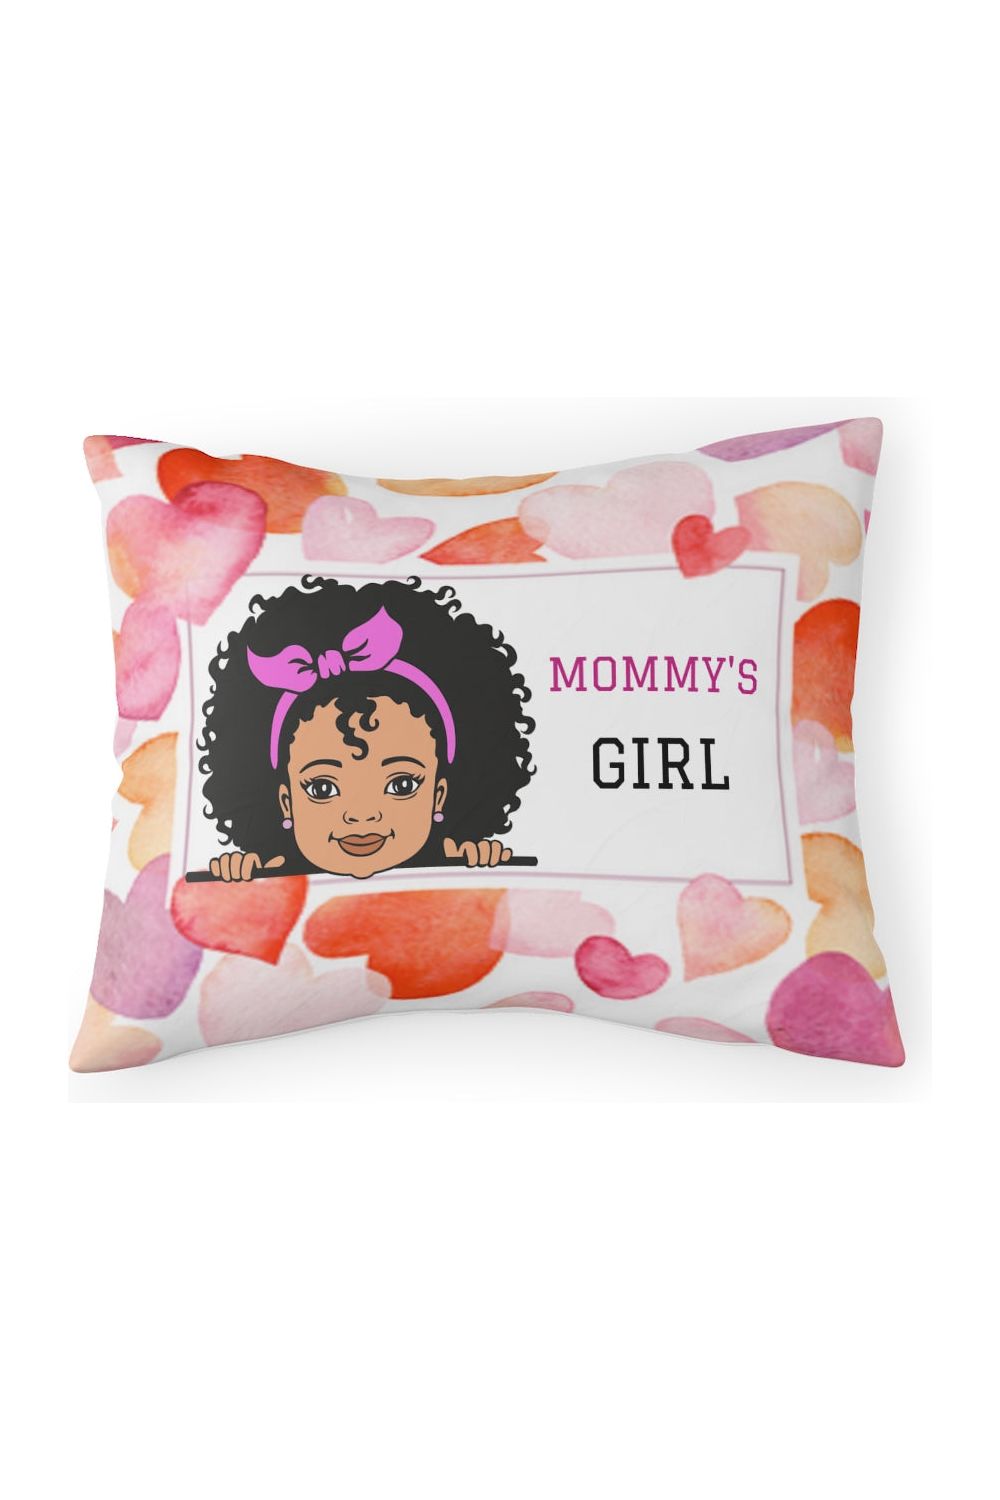 Mommy's Girl One Pillow Sham - NicholesGifts